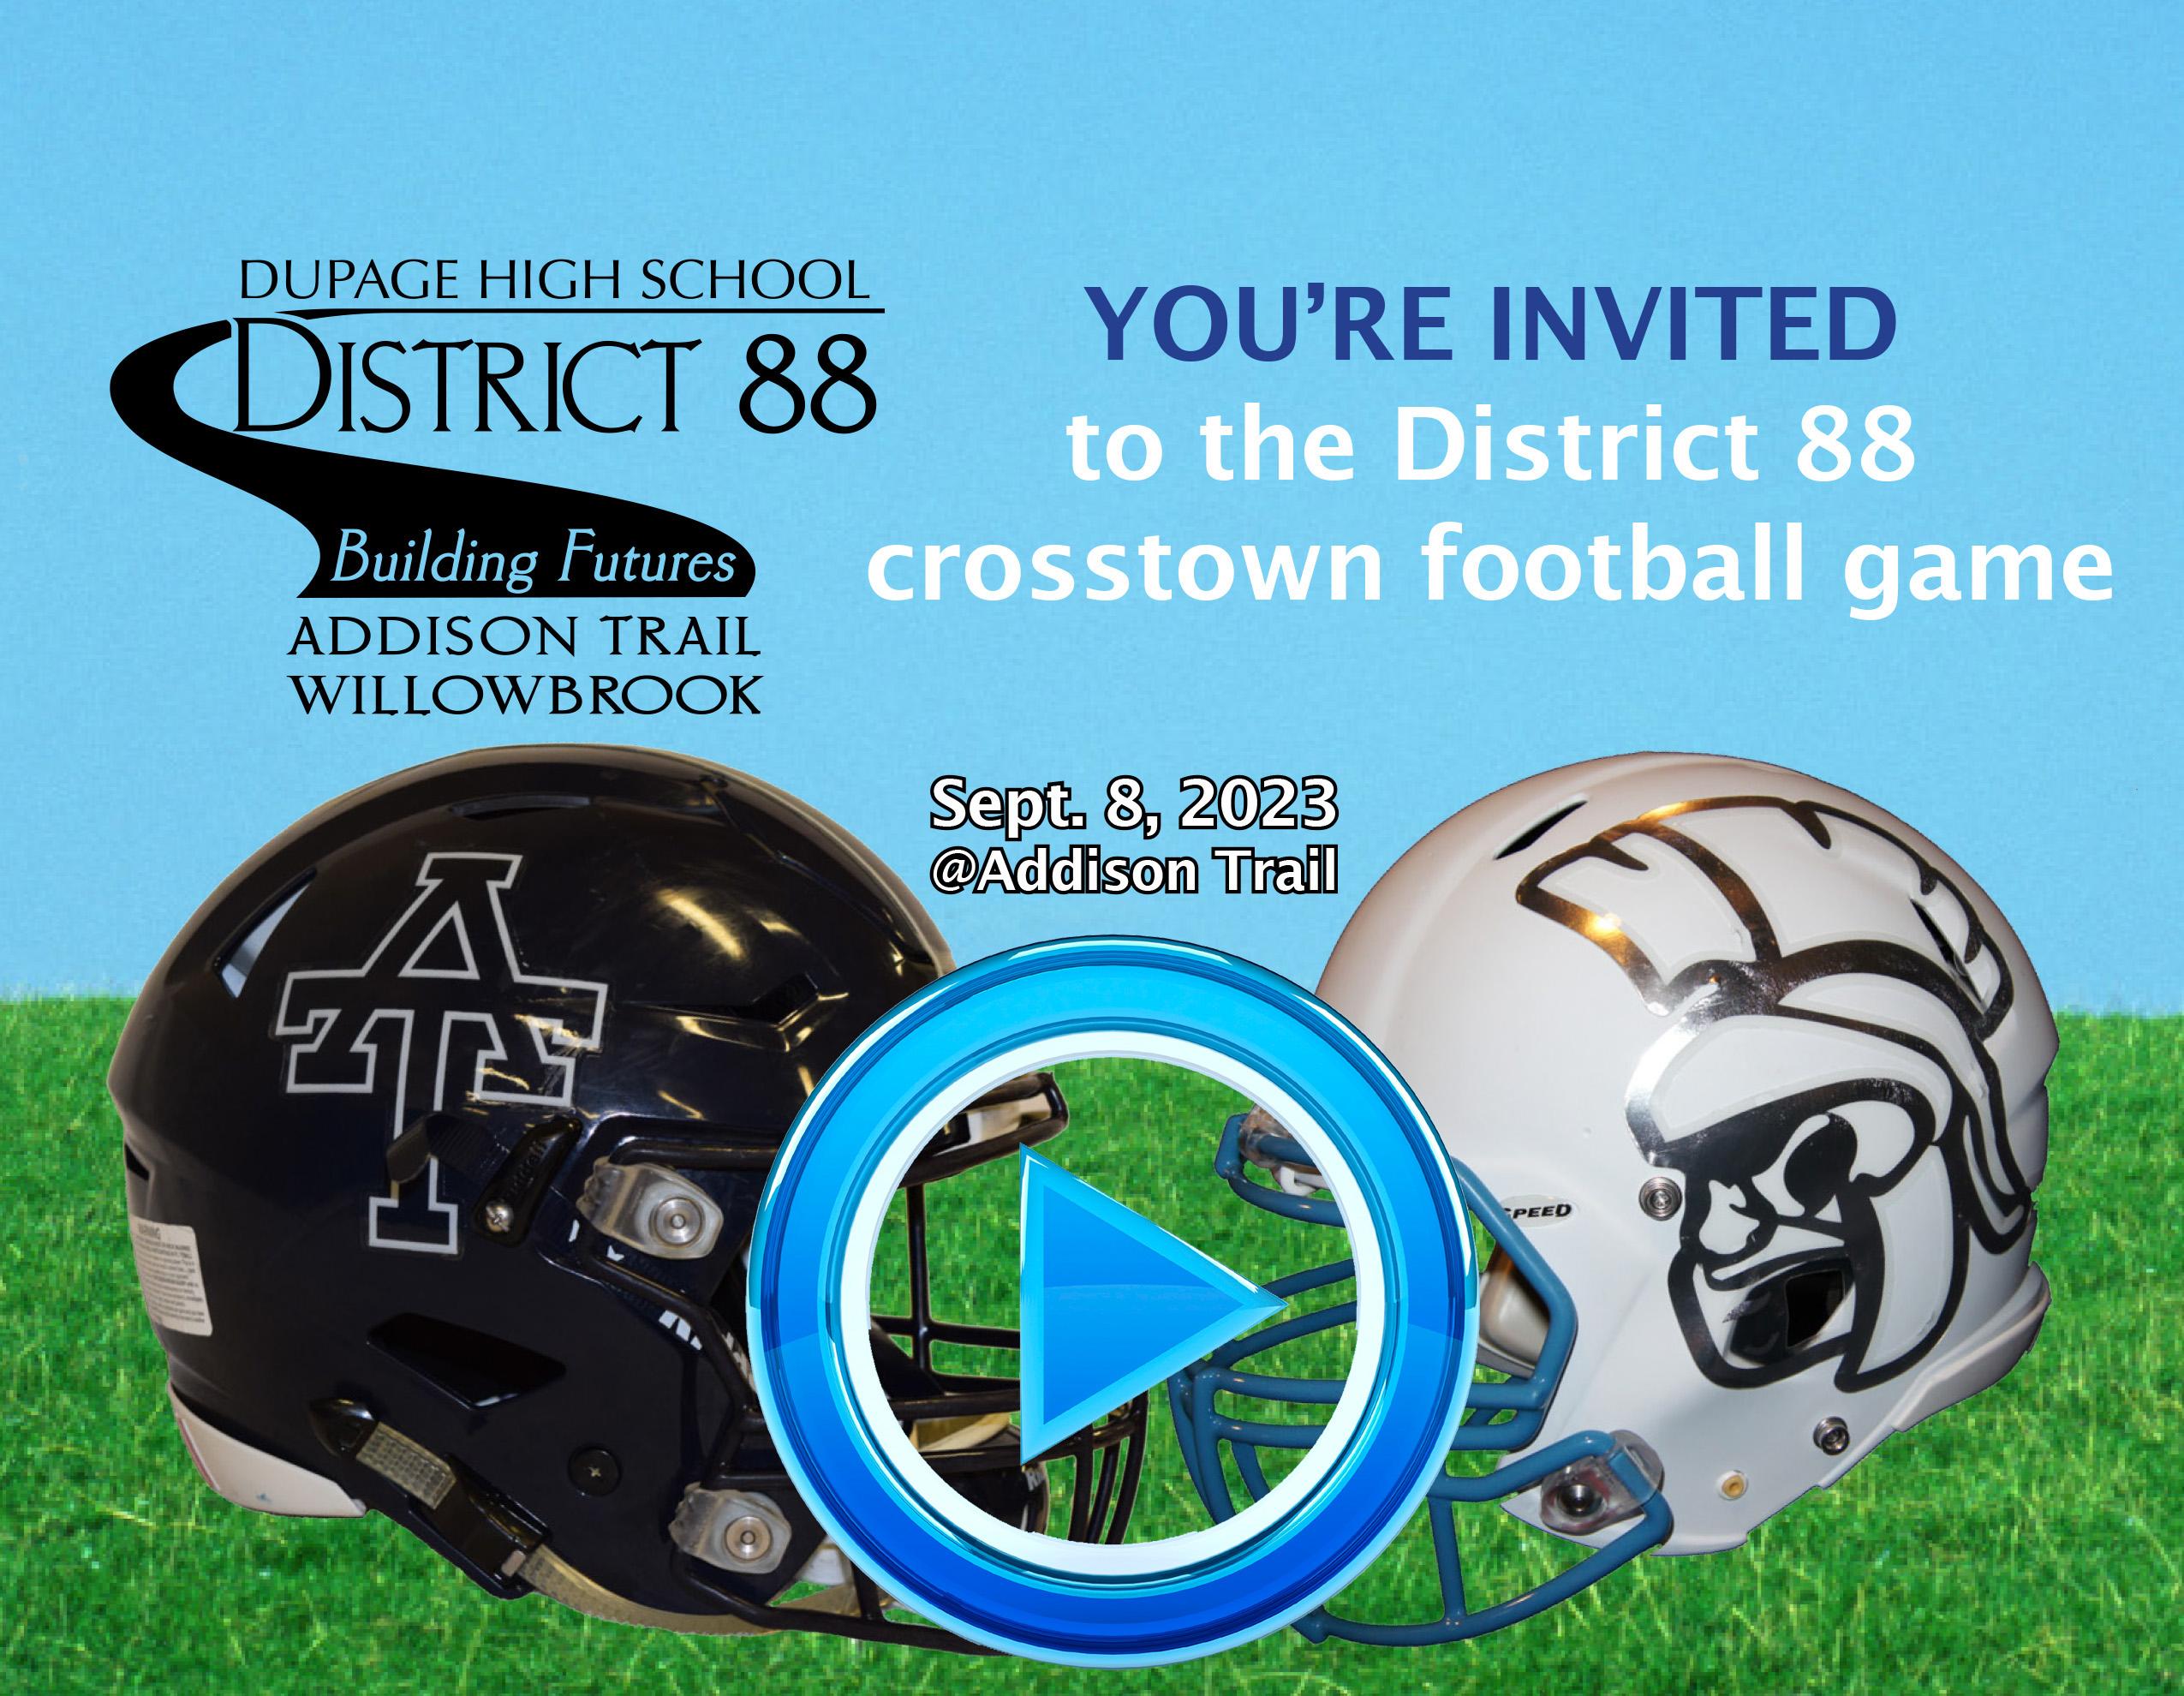 District 88 recognizes community leaders, first responders and veterans during crosstown football game 